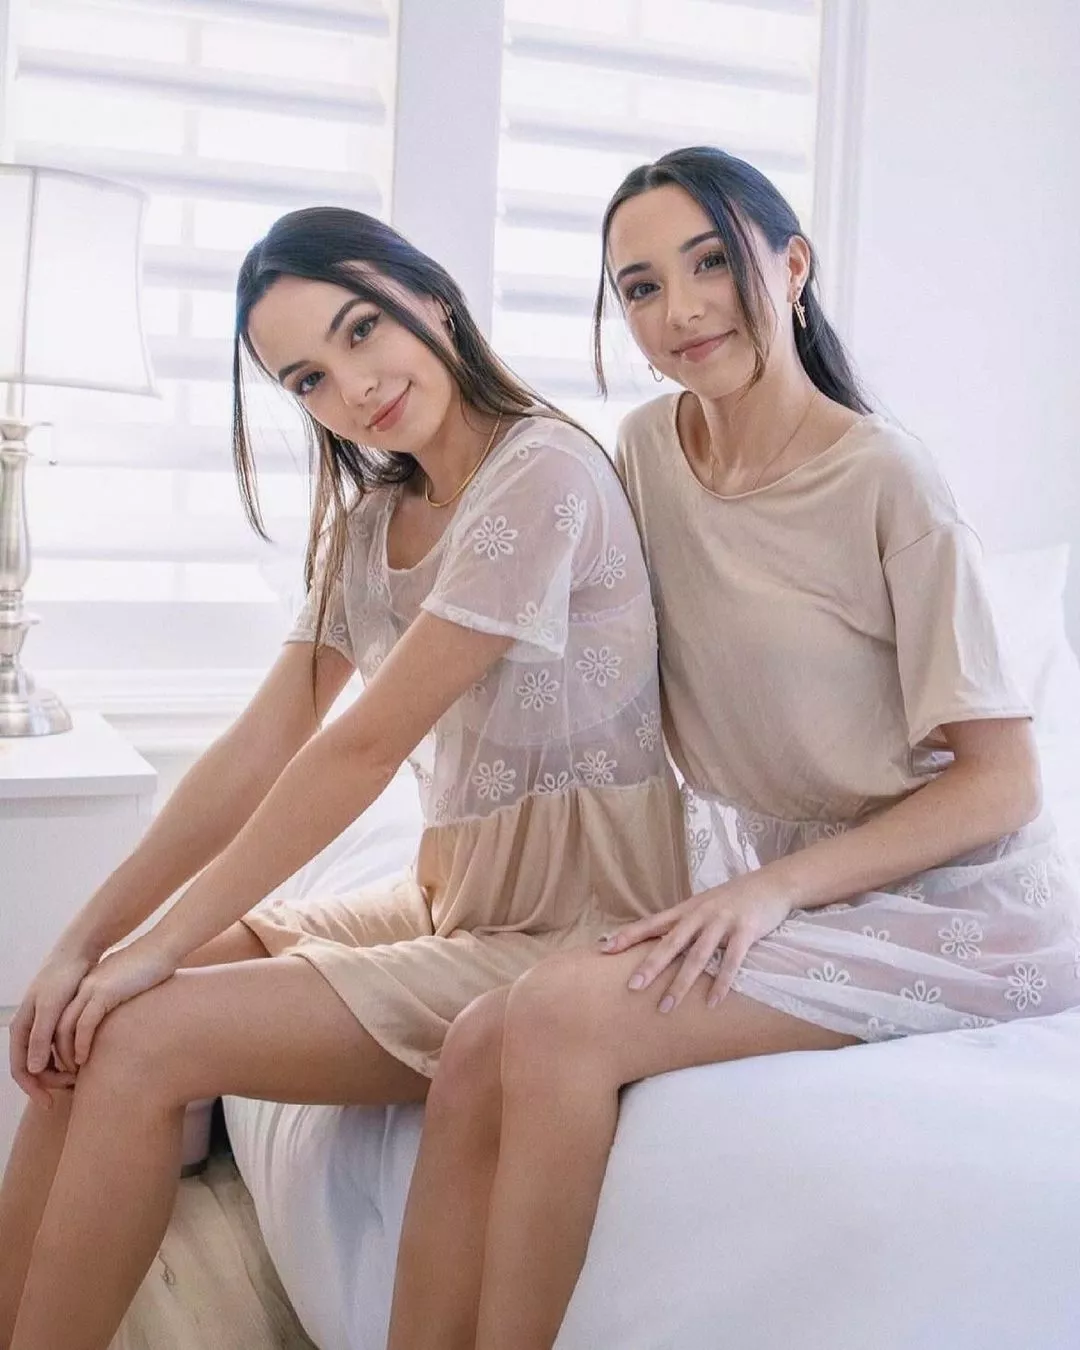 Merrell Twins created by FuzzyDunloppin at TwinGirls - FAPPCELEBS.COM.